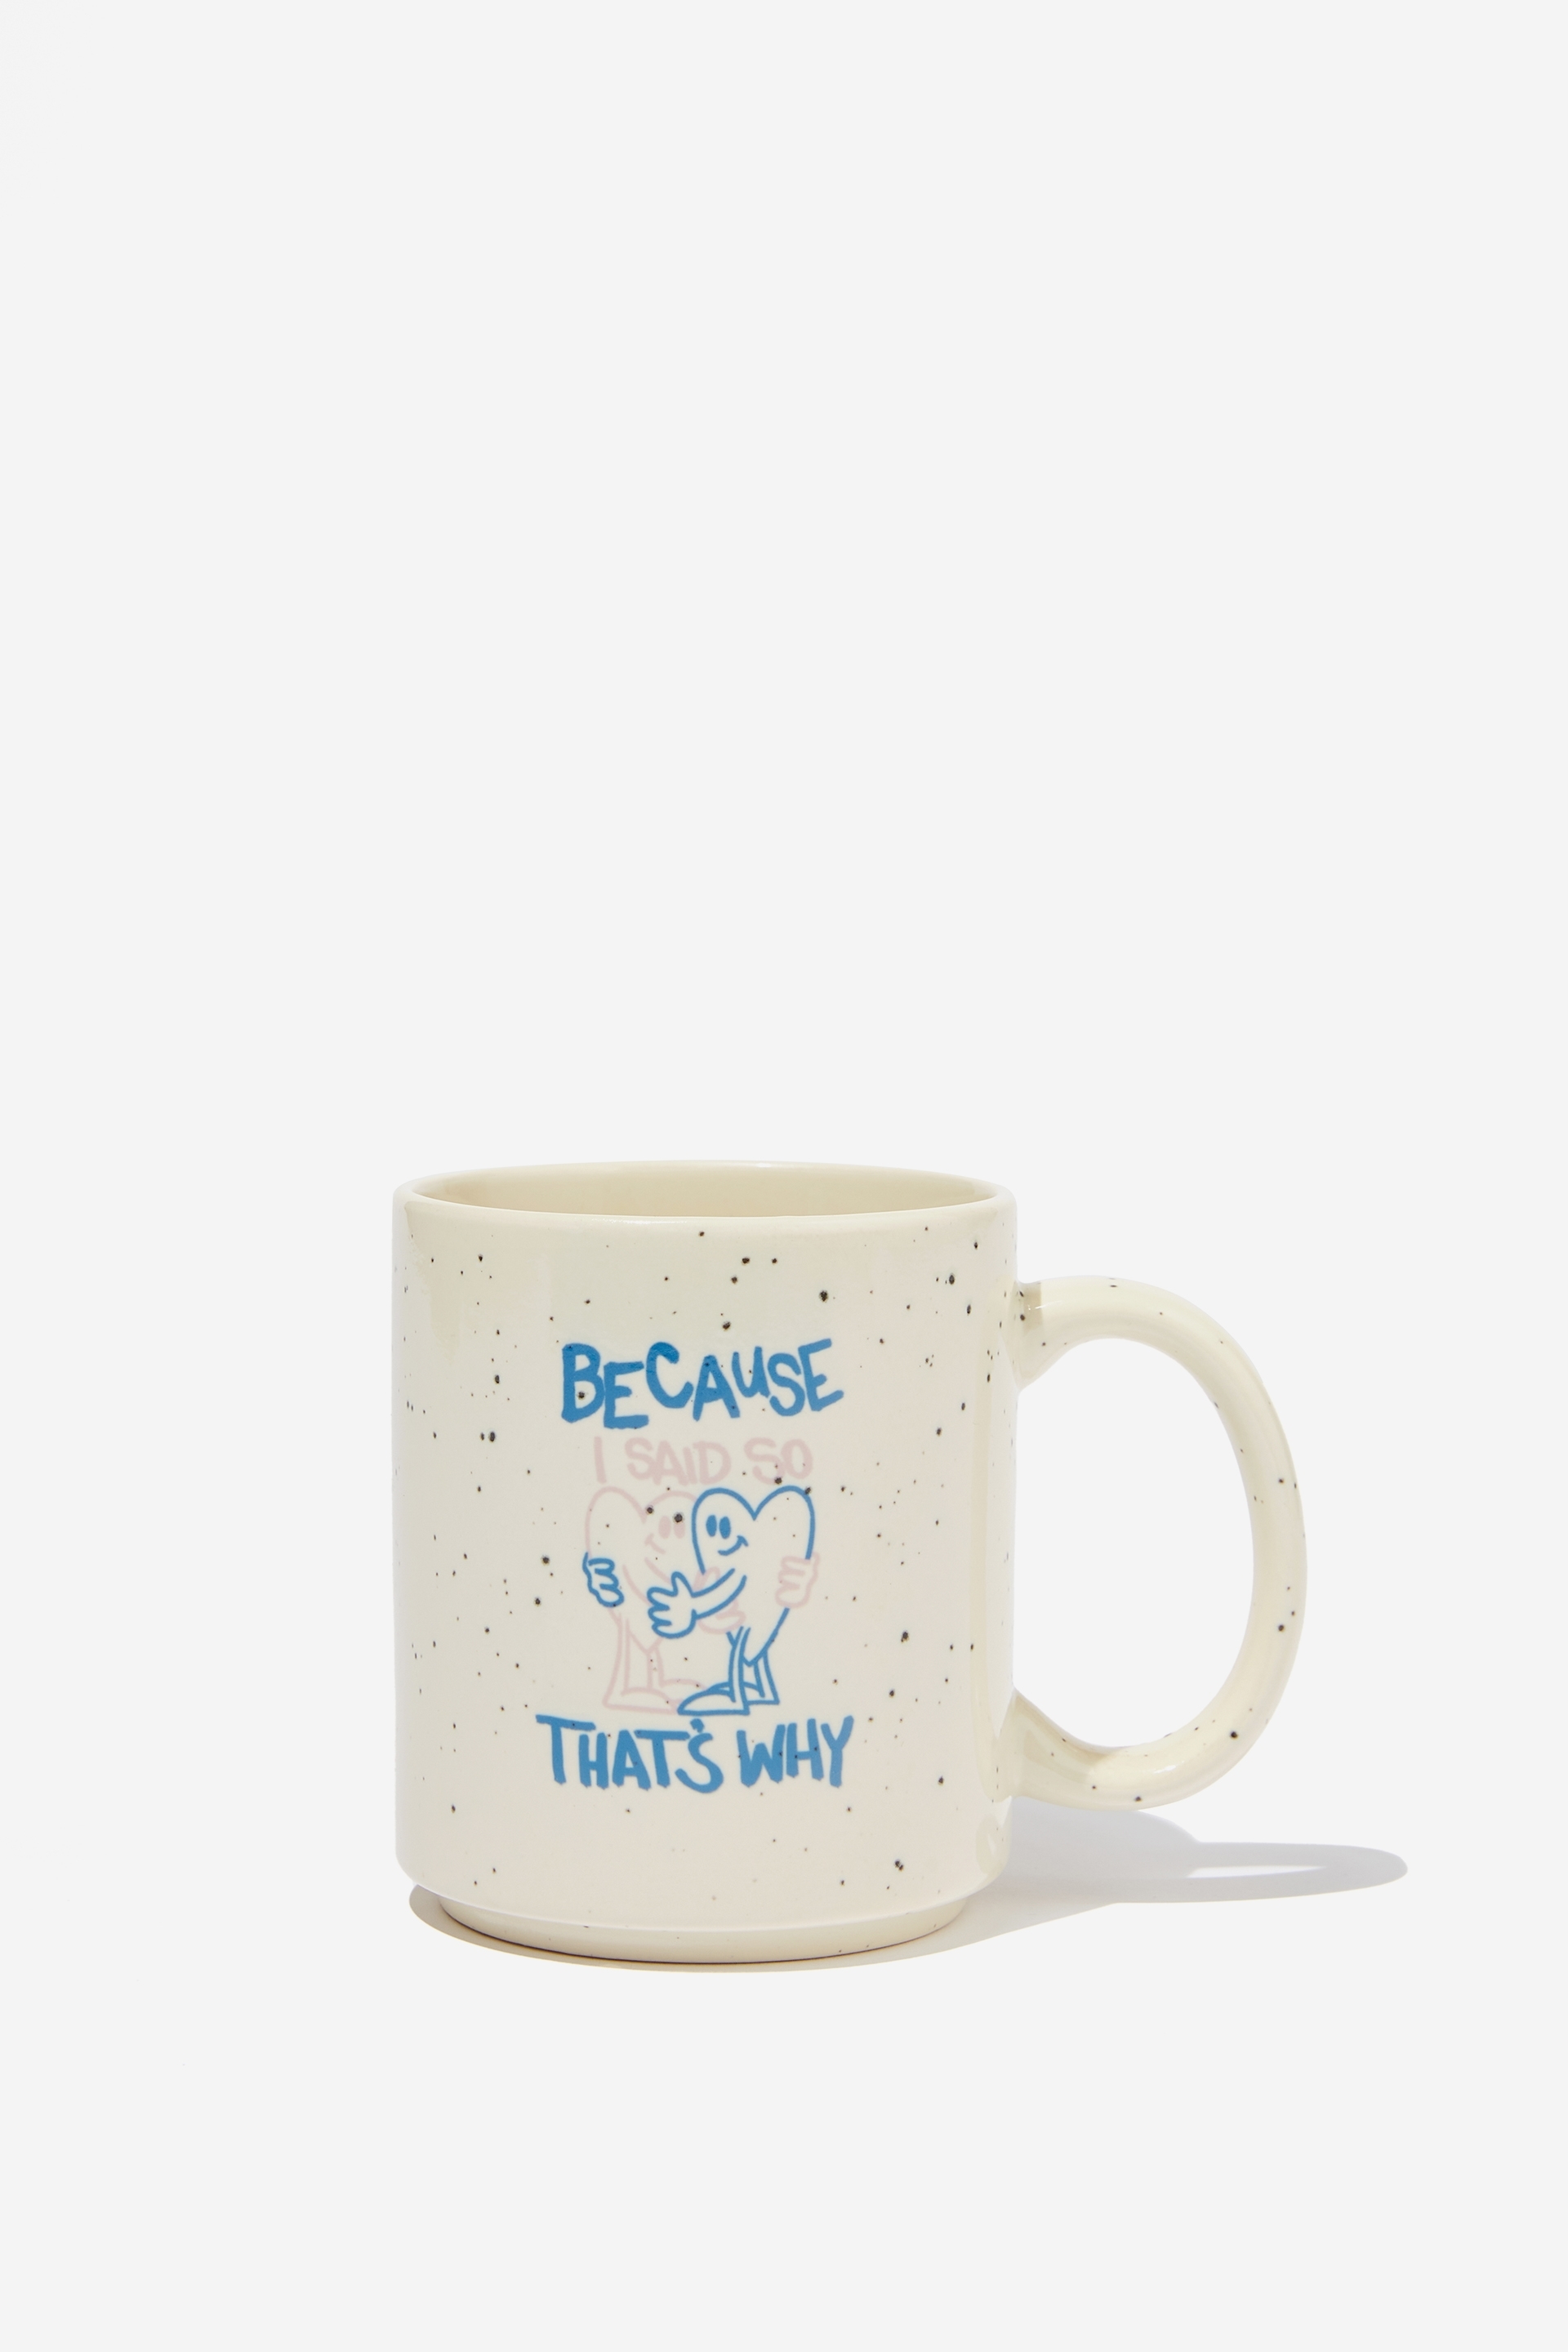 Typo - Limited Edition Mothers Day Mug - Because that’s why speckle